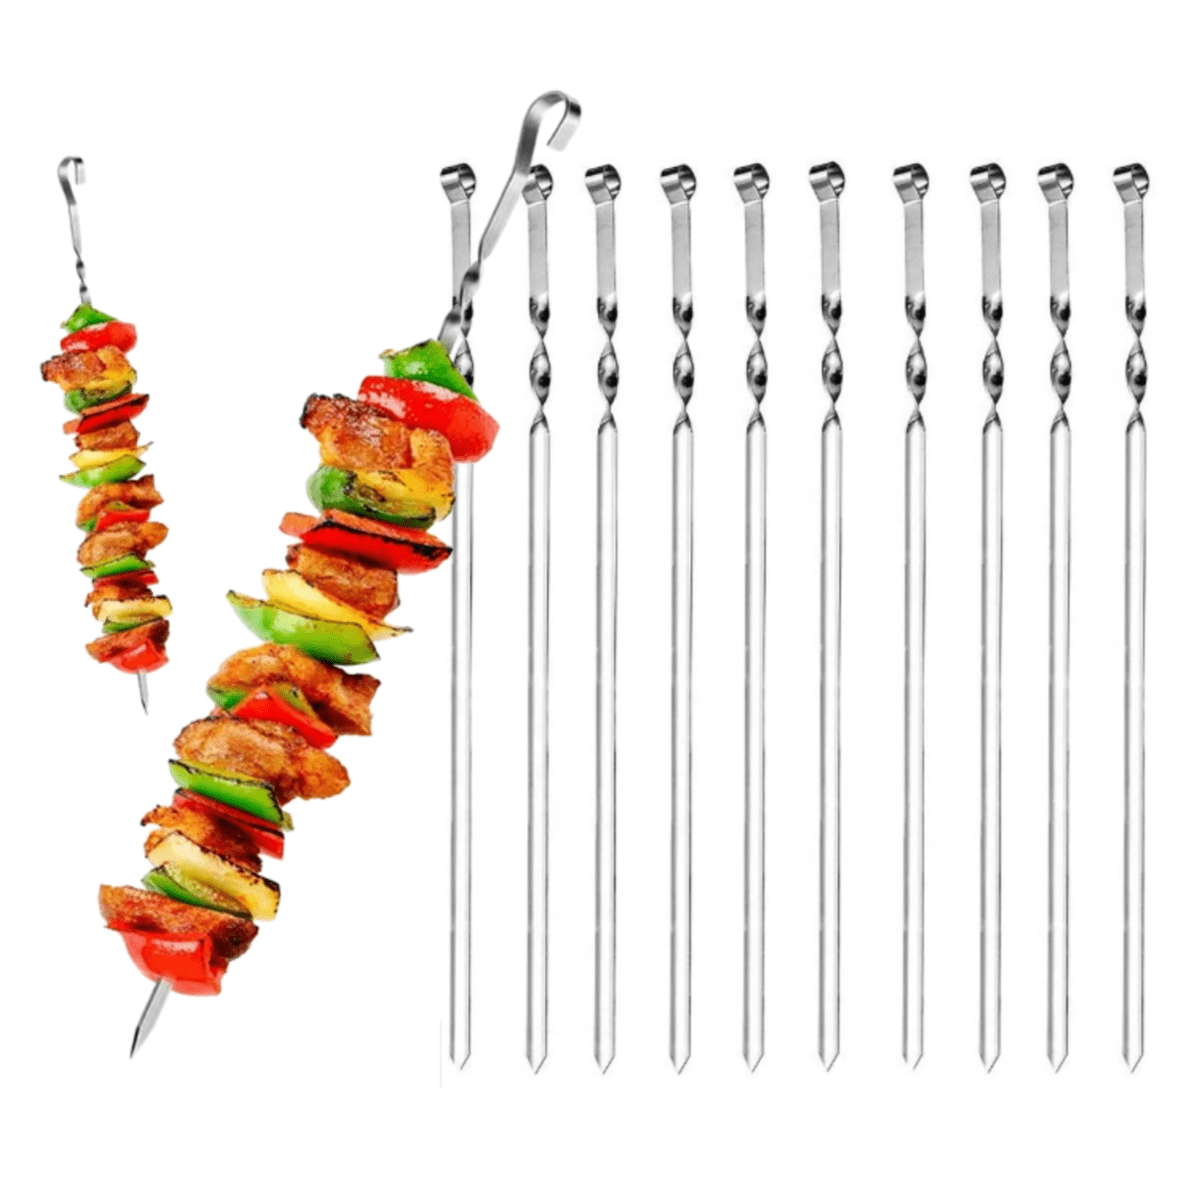 Bbq Skewers Stainless Steel Flat Skewers, Bbq Iron Skewers For Lamb Skewers,  Skewers For Grilled Meat Skewers, Super Easy To Use Bbq Essential Halloween  Christmas Party Favors, Kitchen Accessories Cookware Barbecue Tool